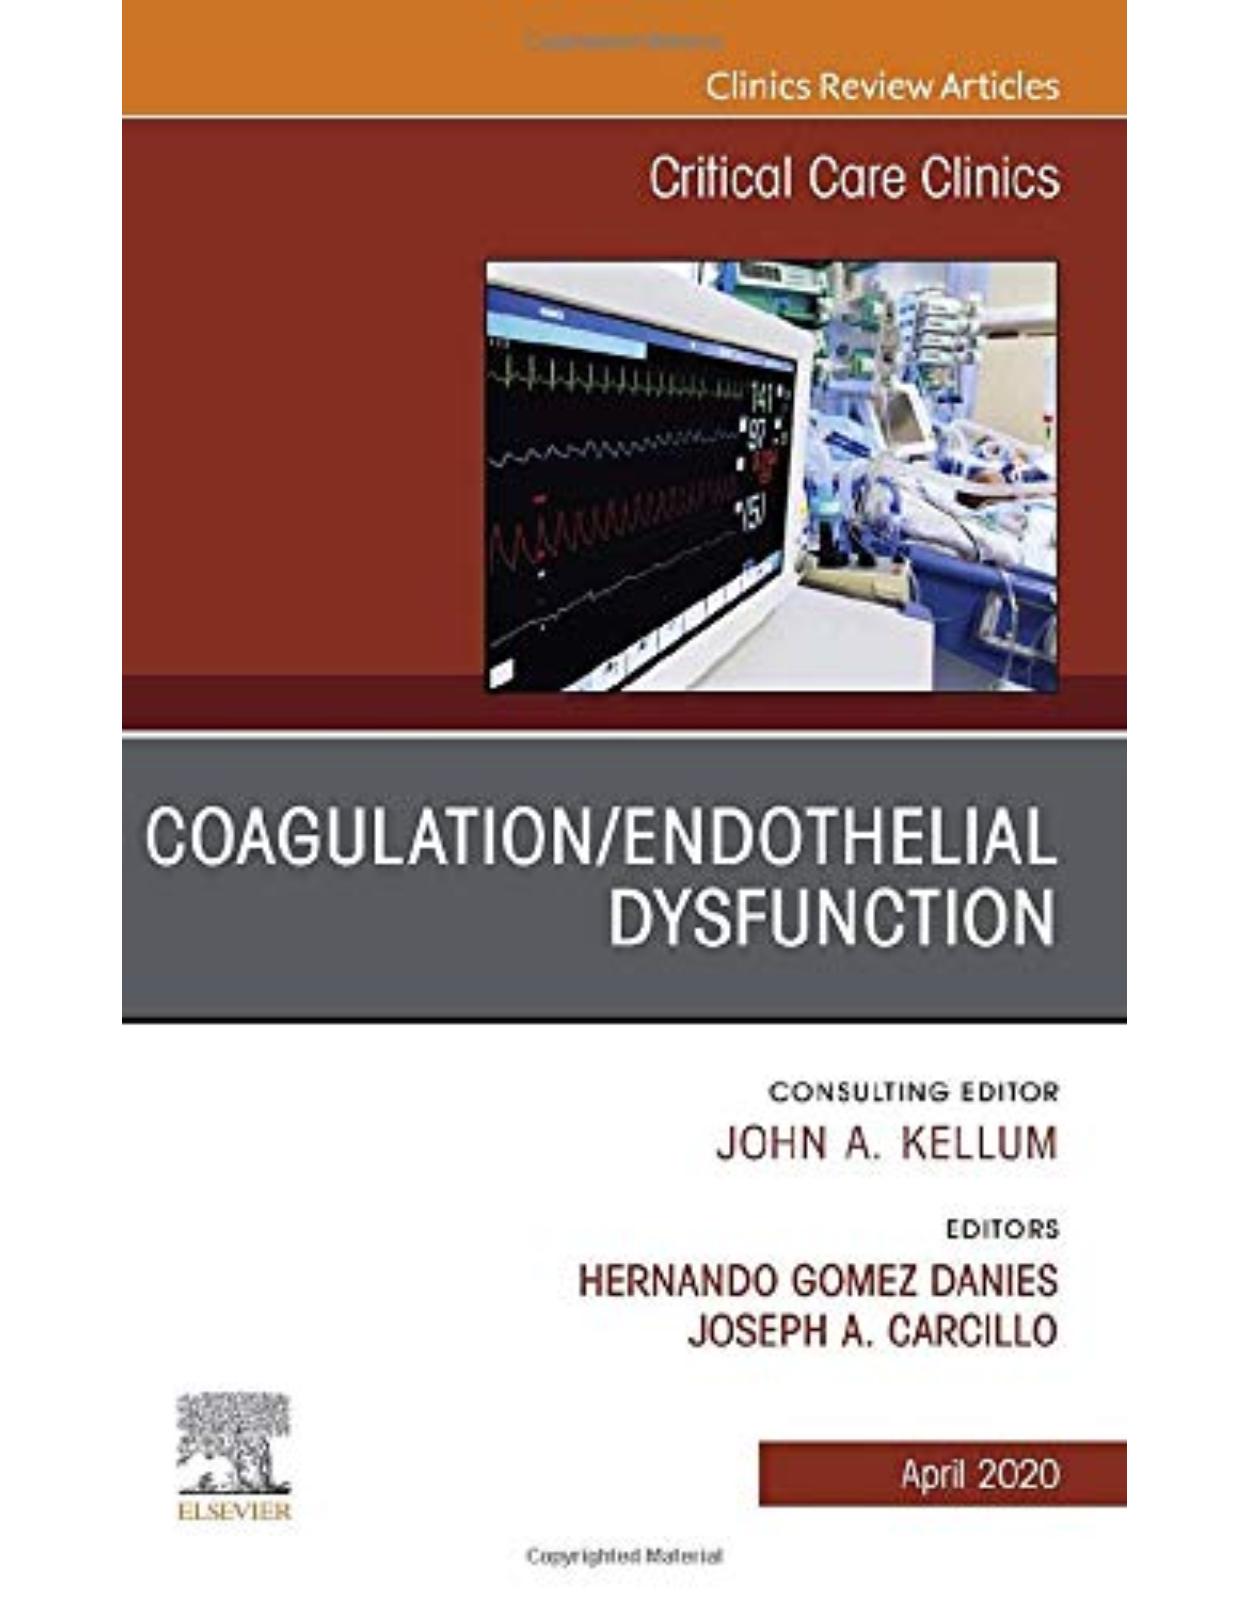 Coagulation/Endothelial Dysfunction ,An Issue of Critical Care Clinics (Volume 36-2)